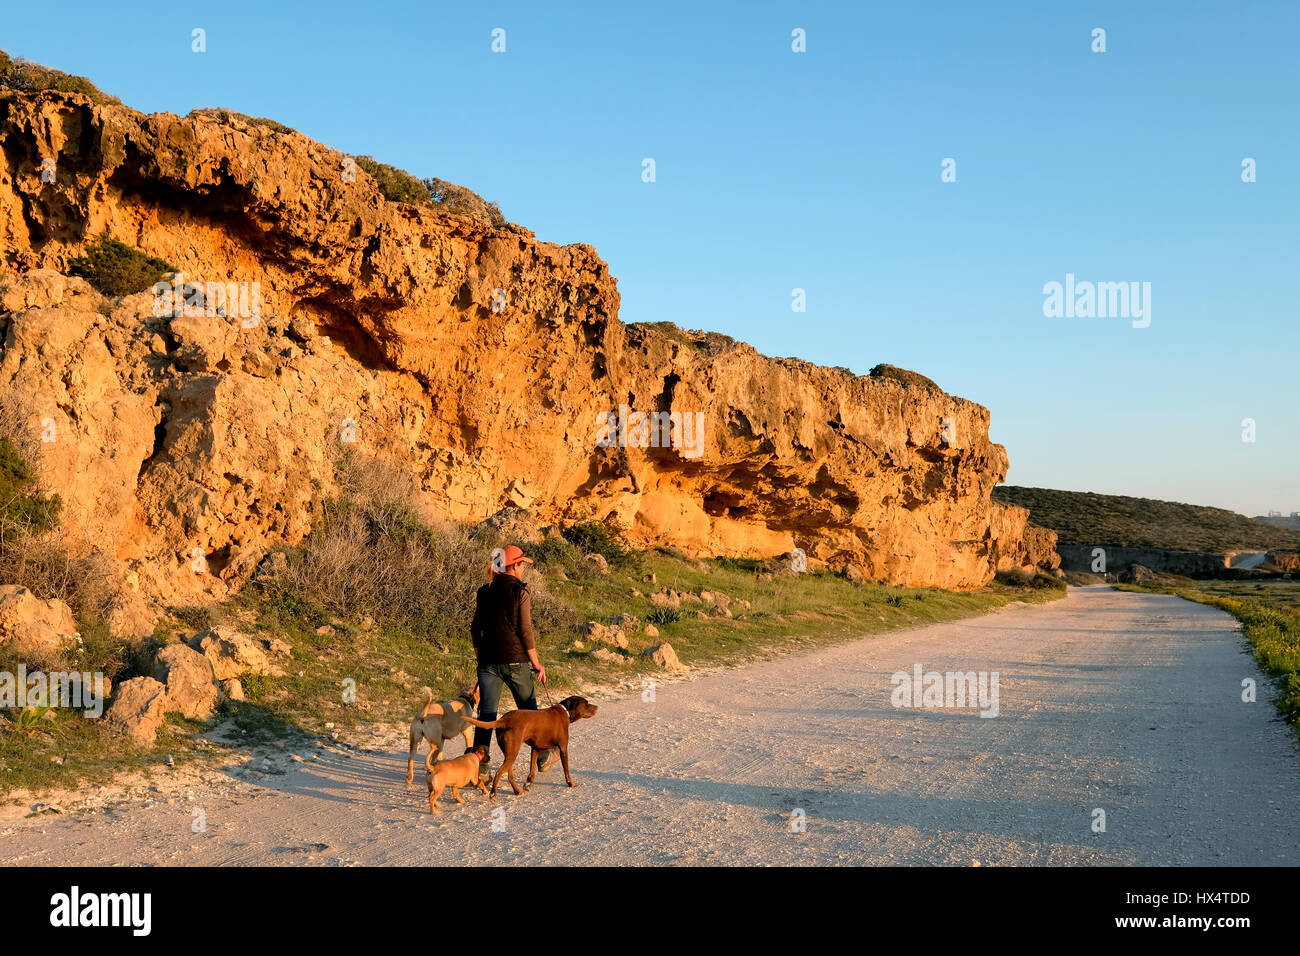 A woman alone walking dogs on the road to the Akamas Peninsula, Paphos region, Cyprus Stock Photo